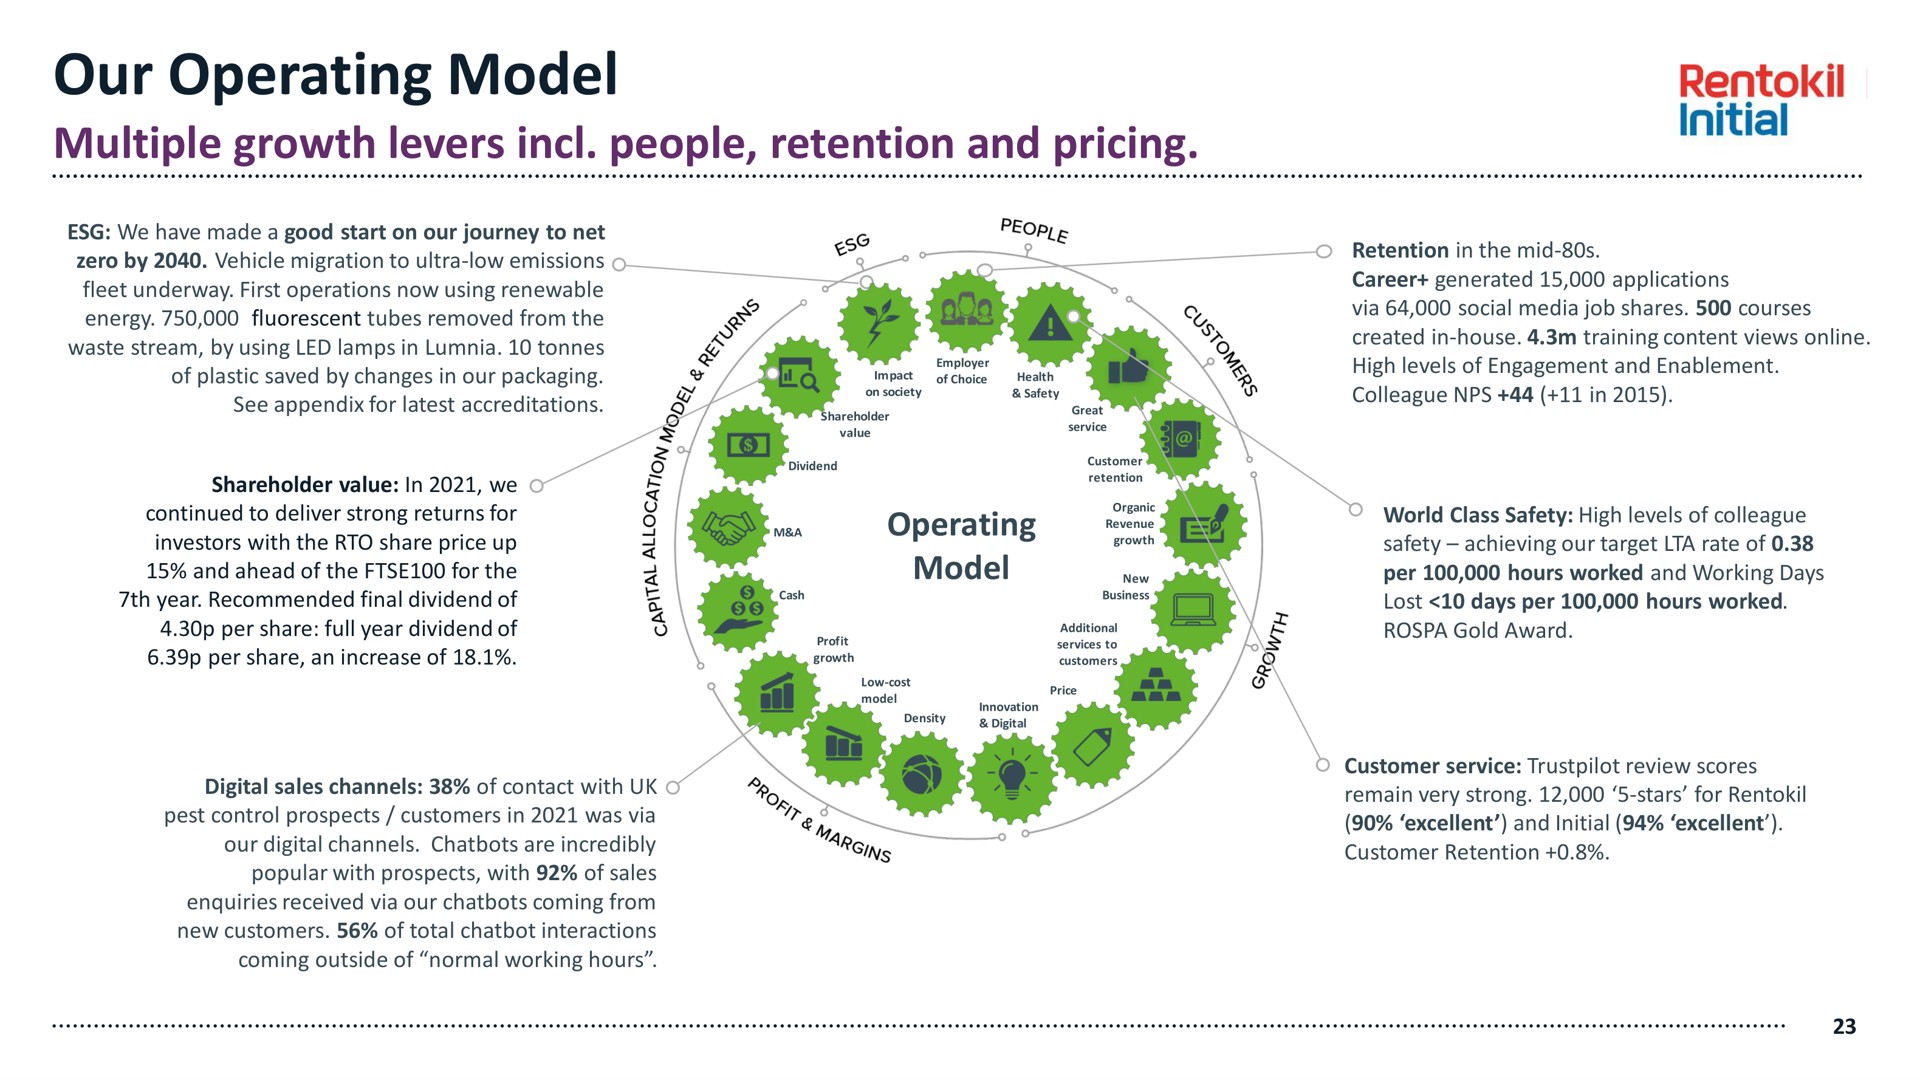 our operating model multiple growth levers people retention and pricing | Rentokil Initial